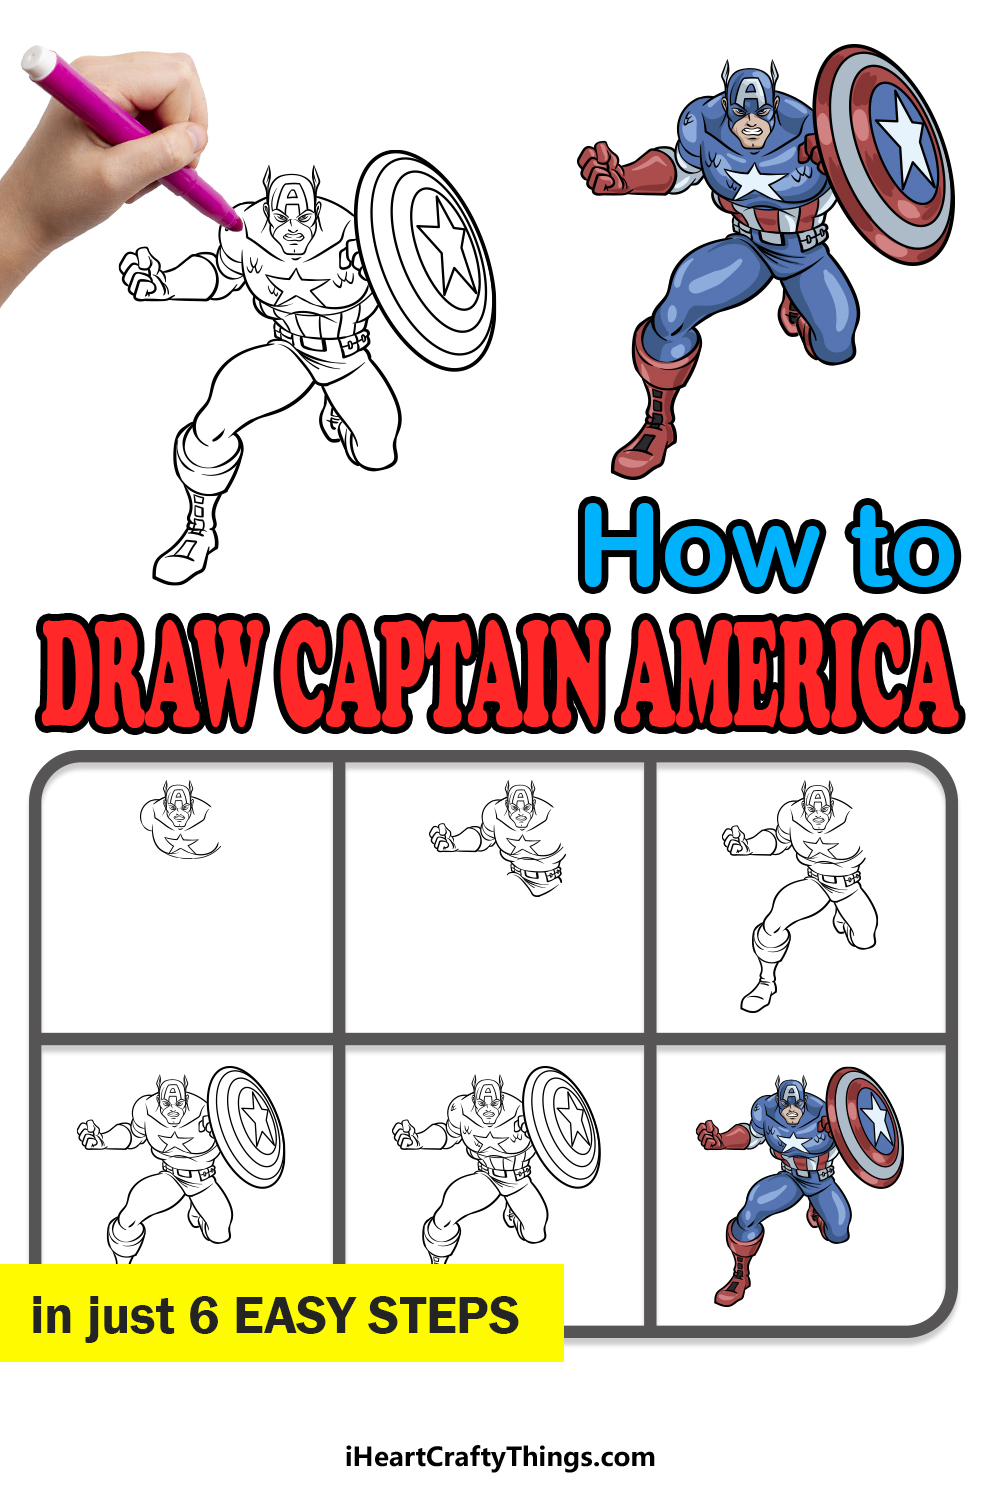 Captain America Drawing by A Little Sketchy on Dribbble-saigonsouth.com.vn